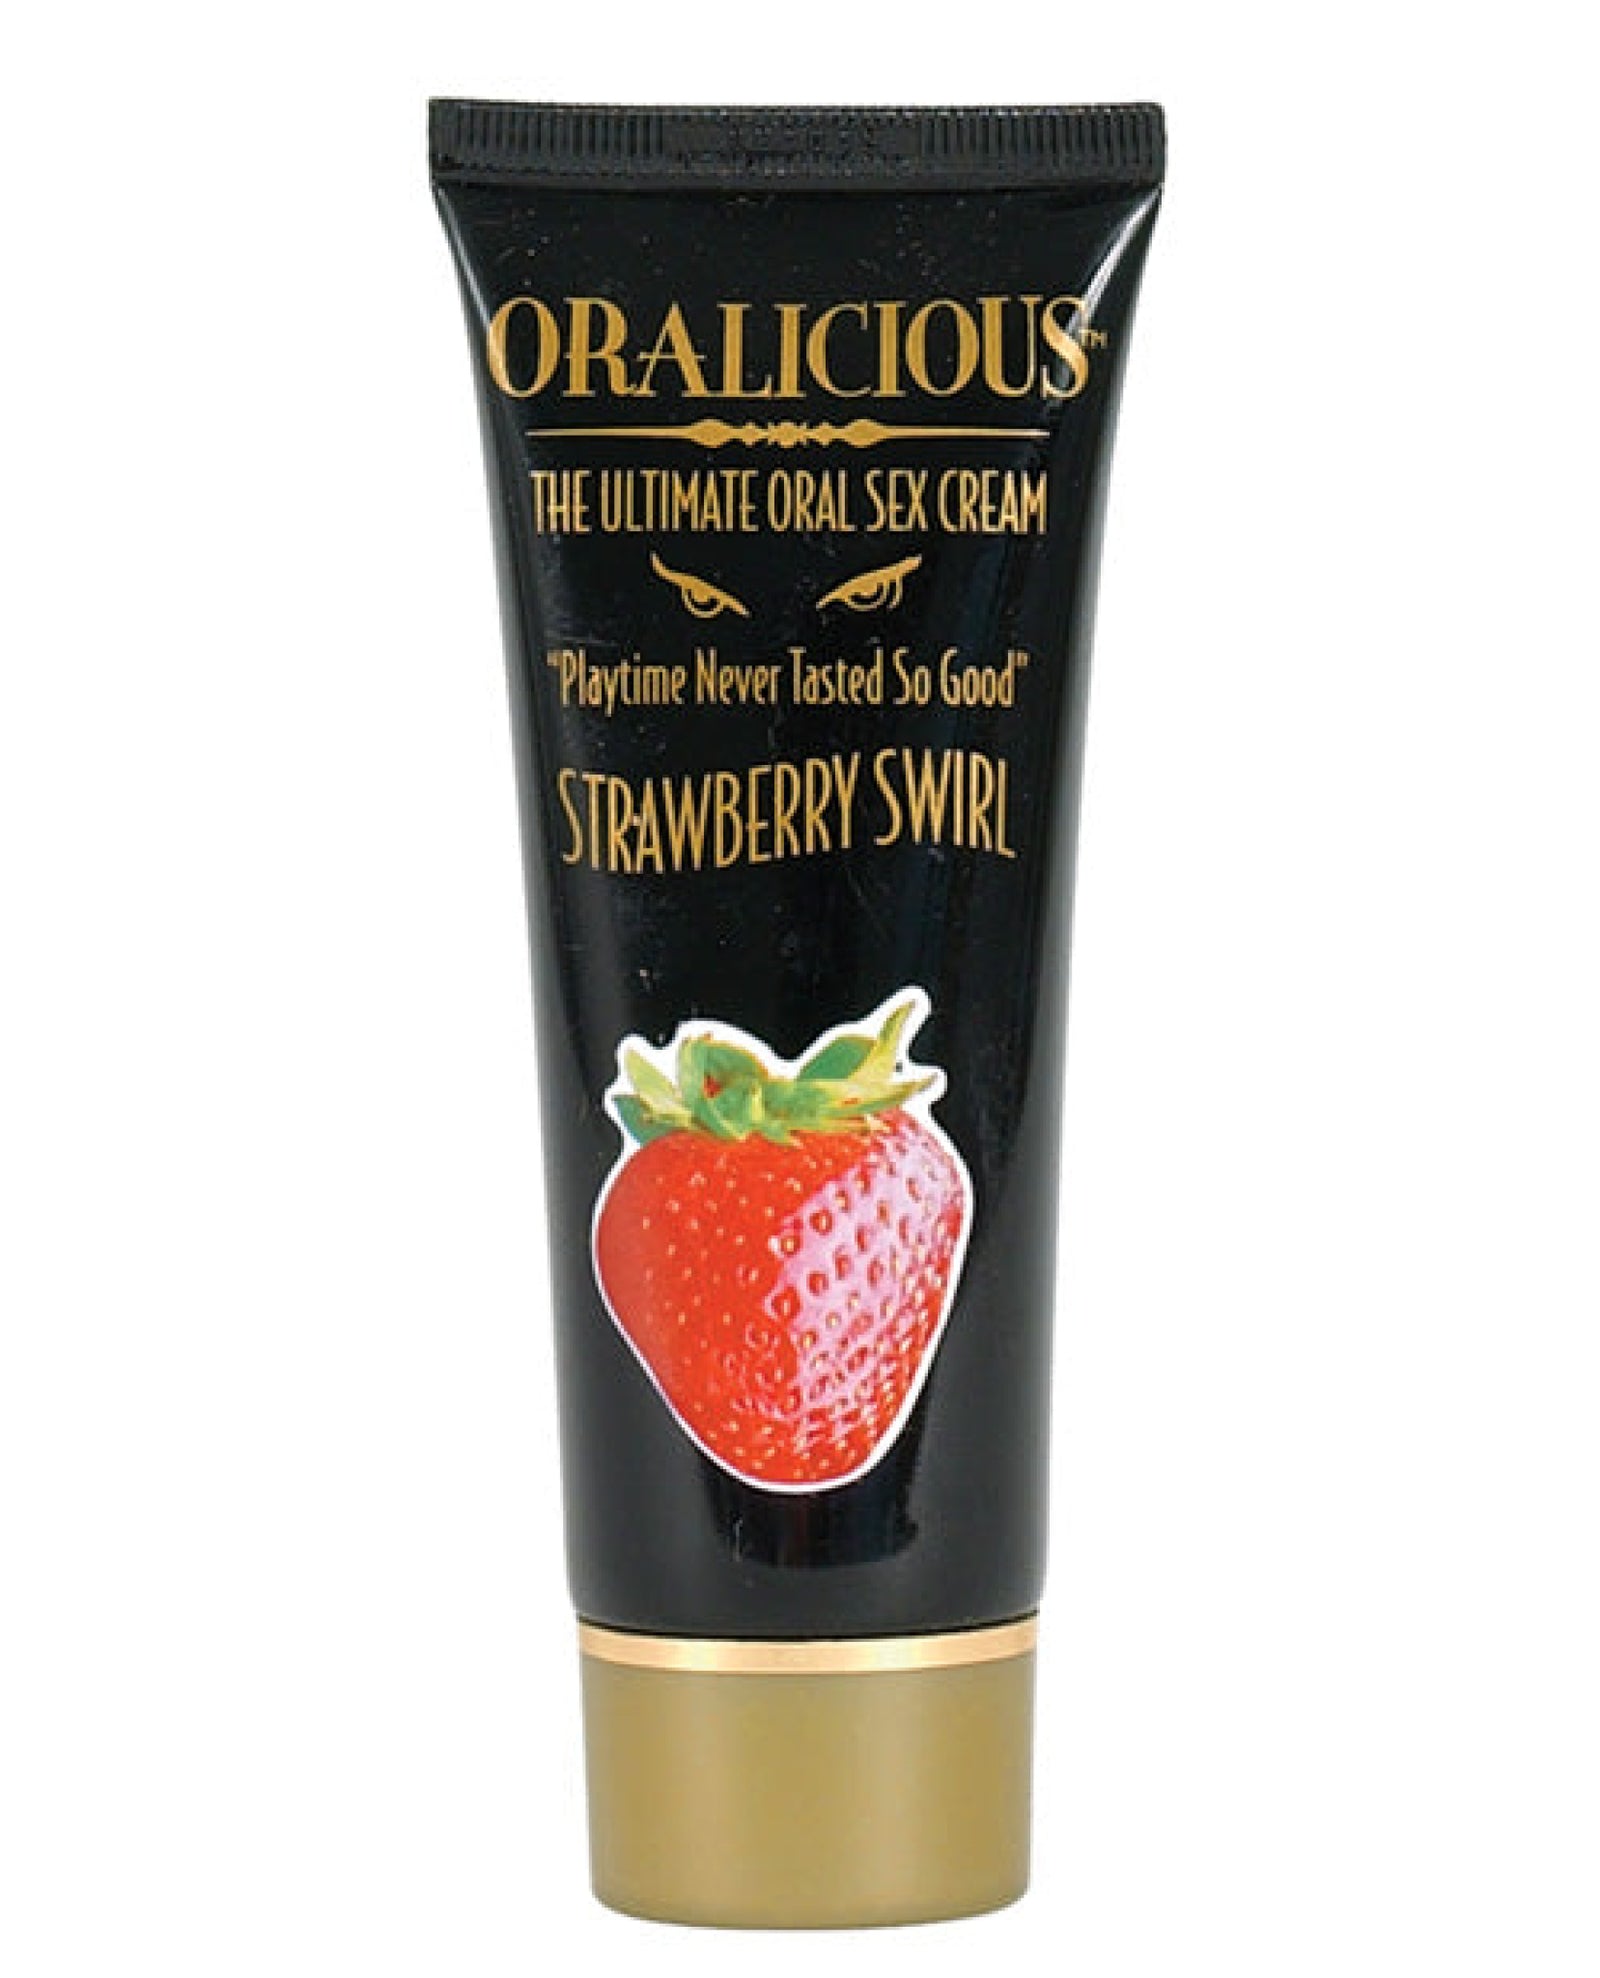 Oralicious Hott Products